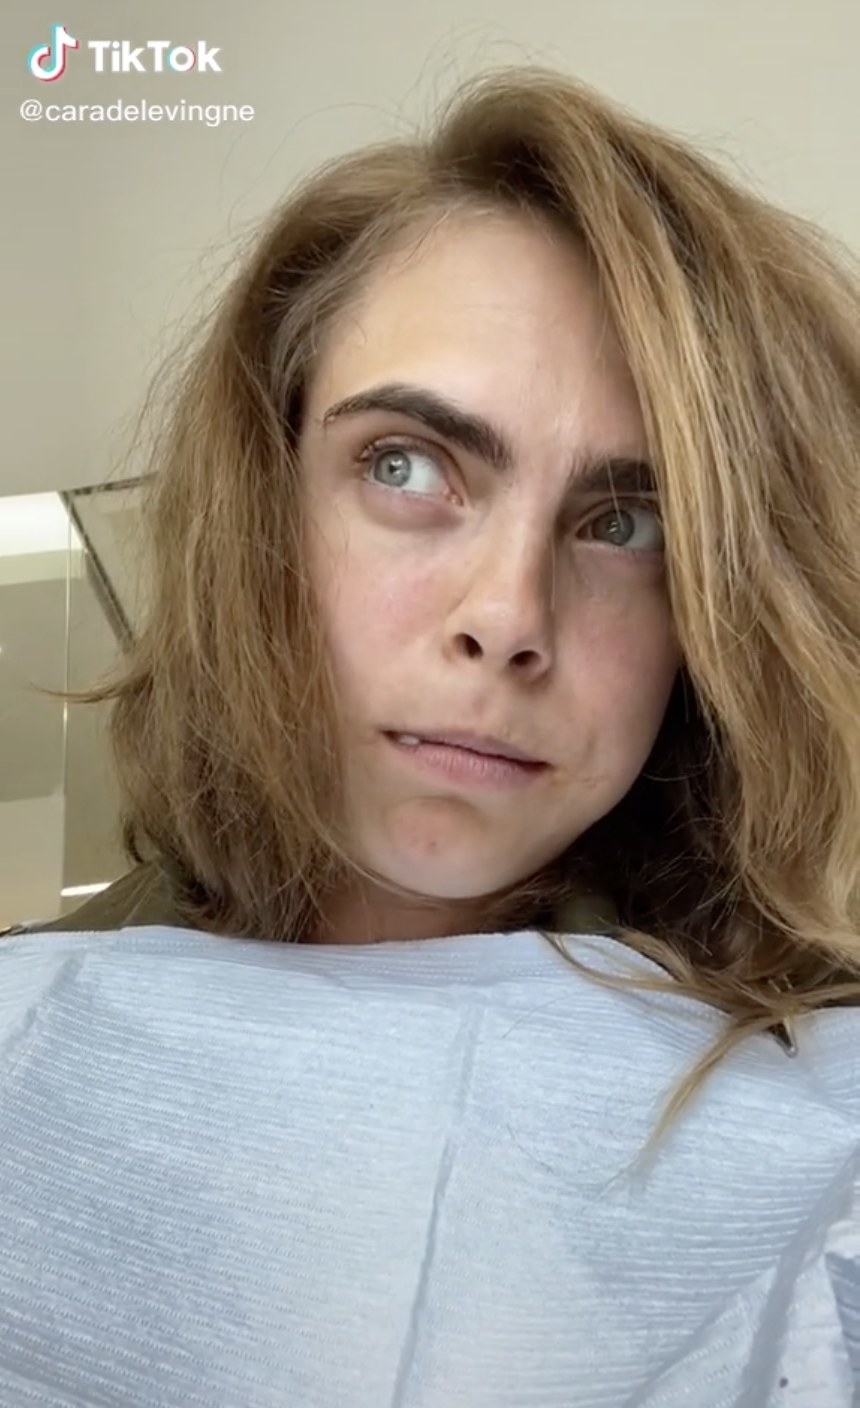 Cara looks over to the other side of the room